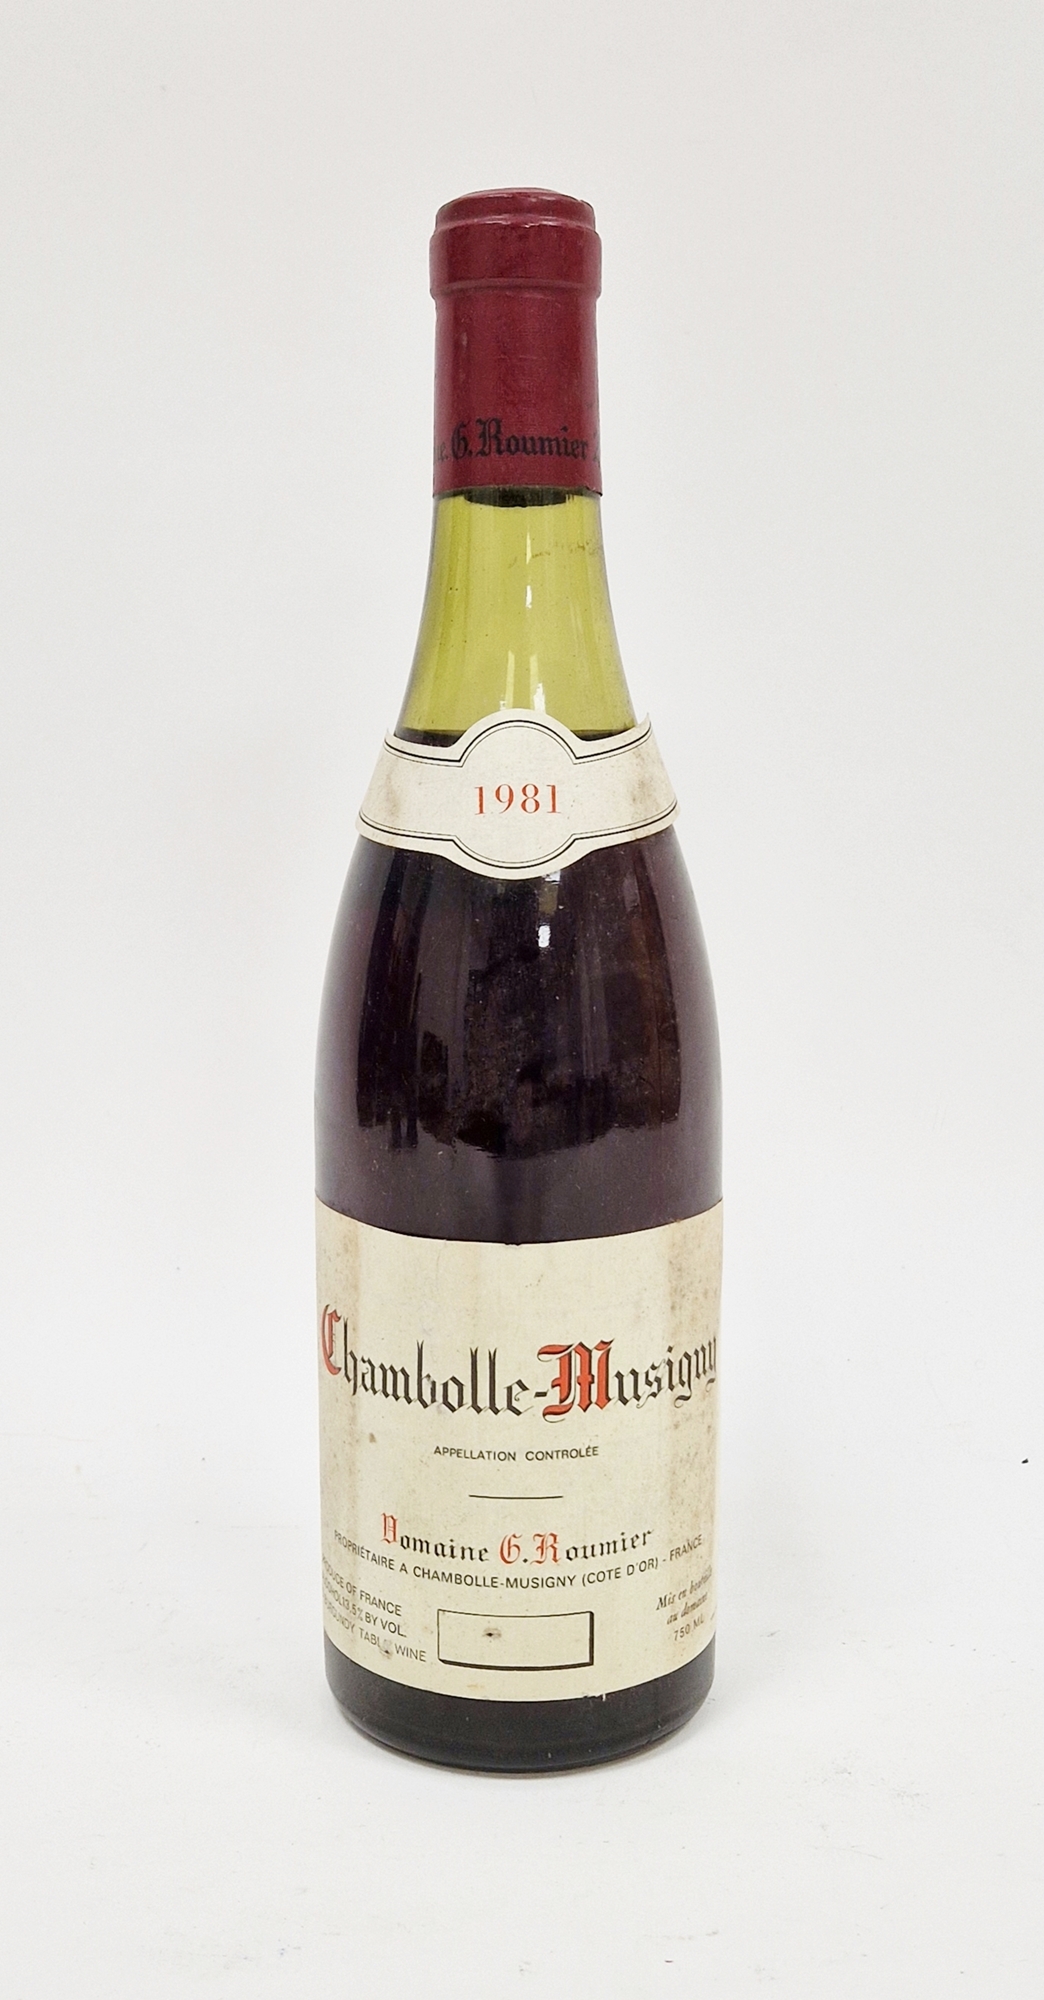 Bottle of Chamboille-Musigny, Domaine G Roumier burgandy 1981 (low neck)